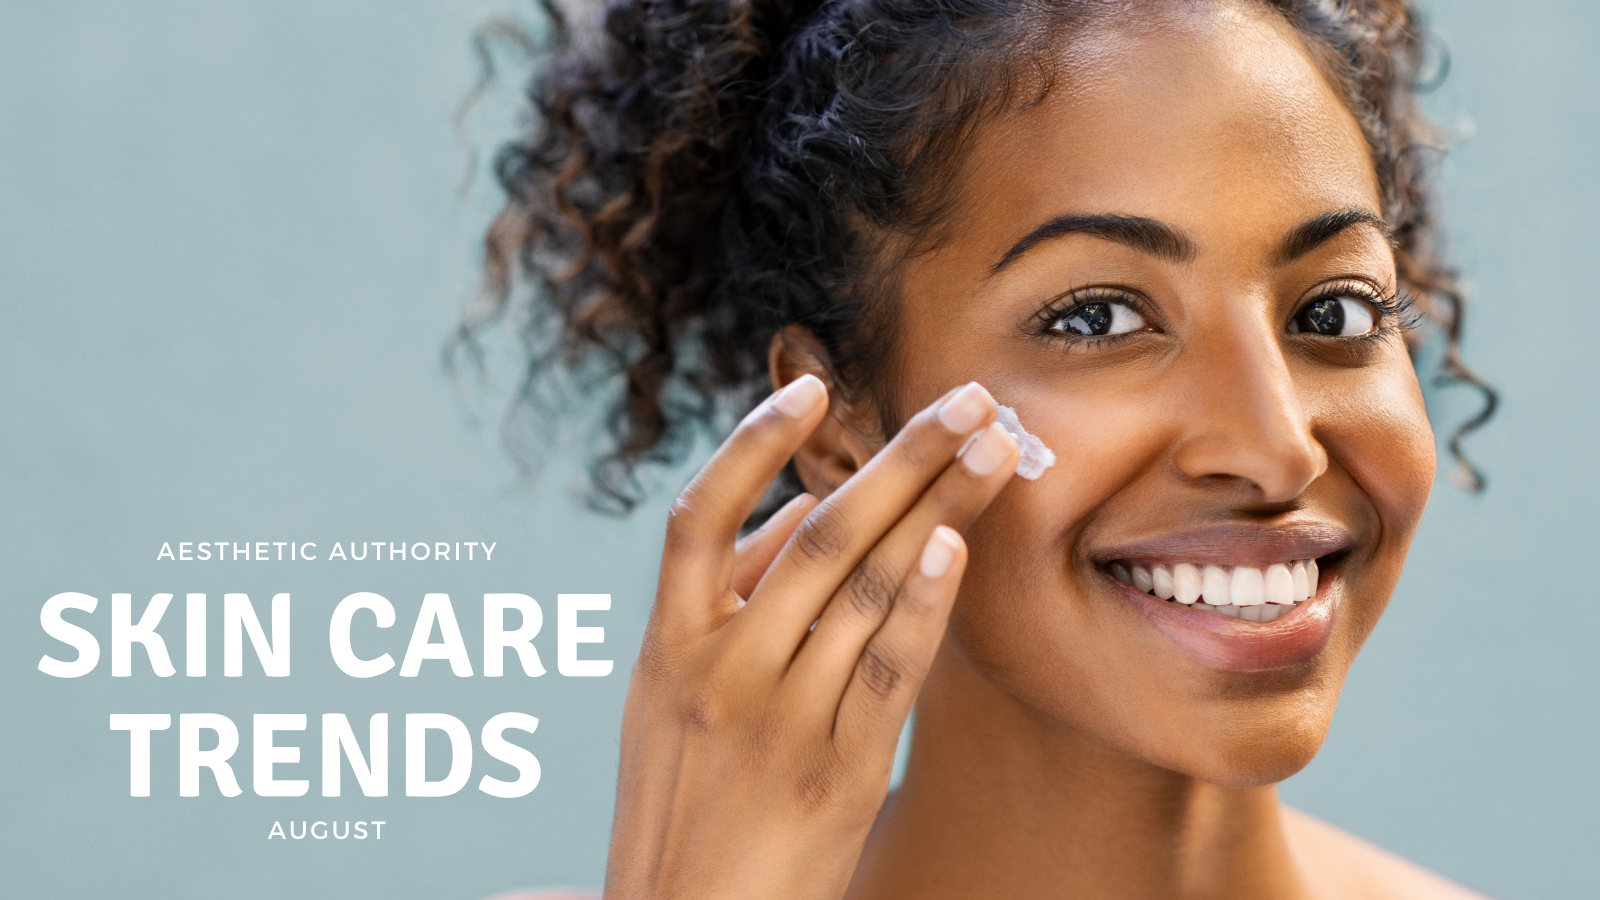 What’s Trending in Skin Care?